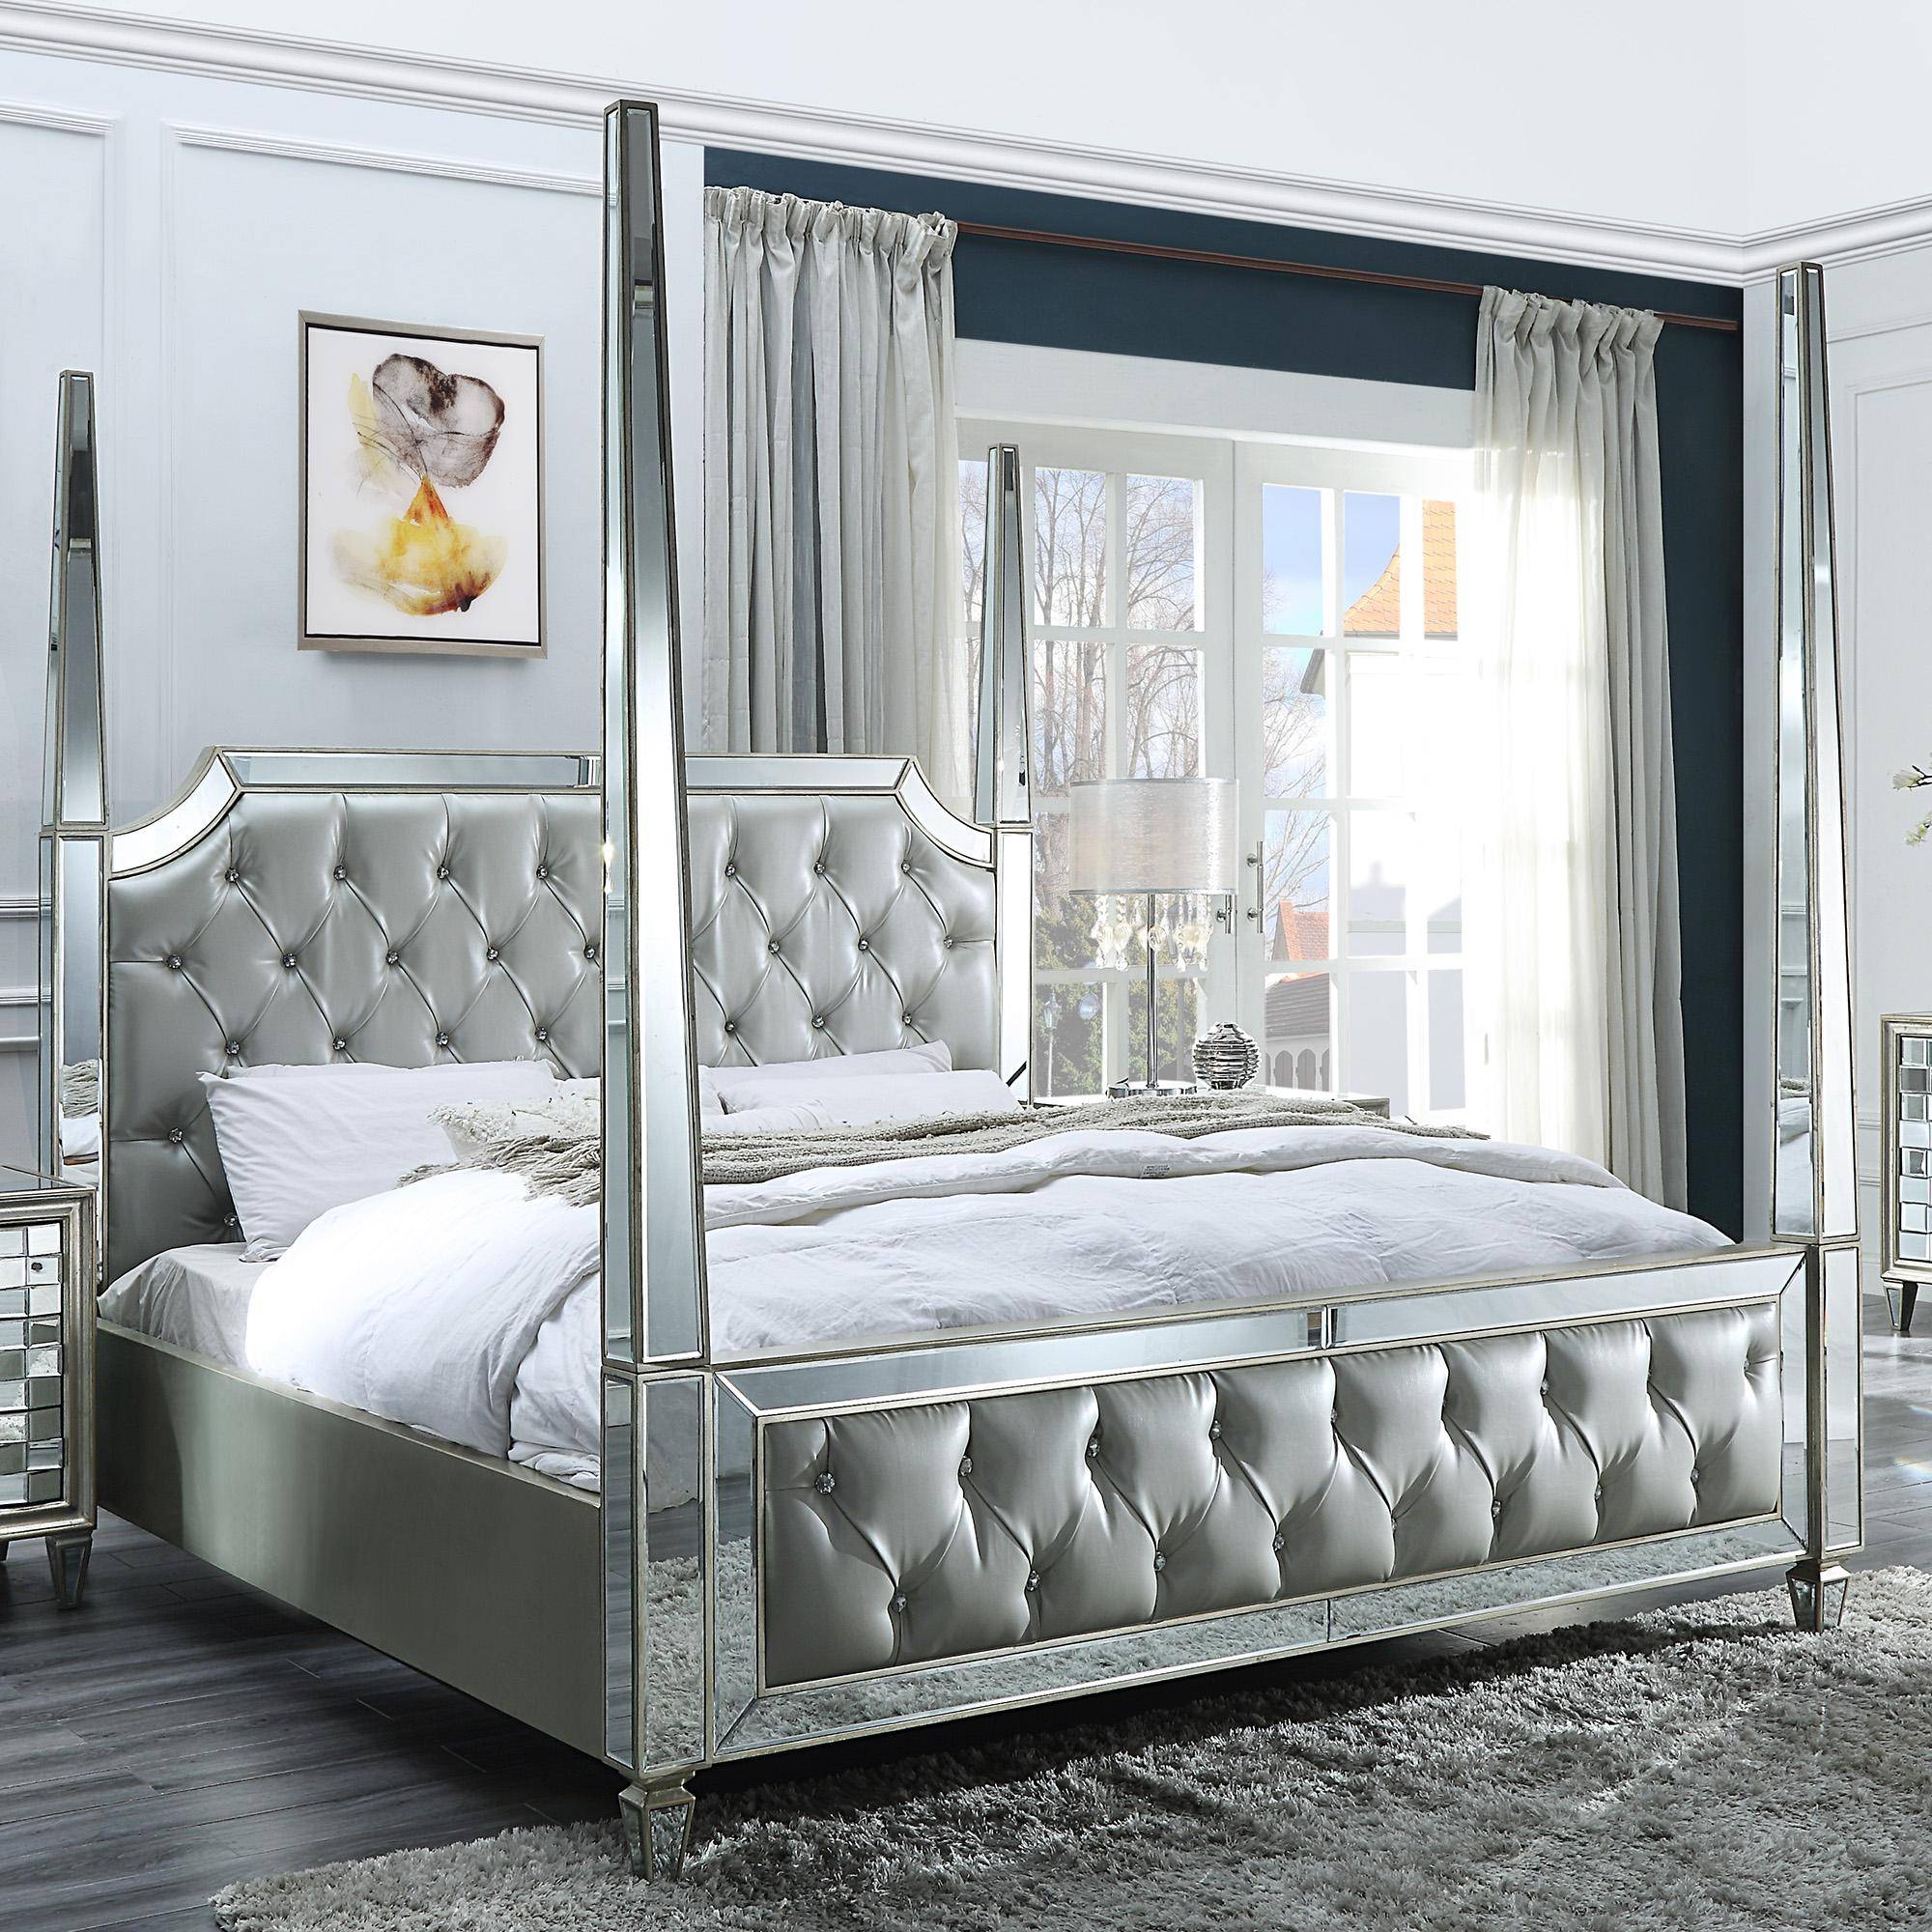 Homey Design Hd 6001 King Canopy Bed, Silver Canopy Bed Frame